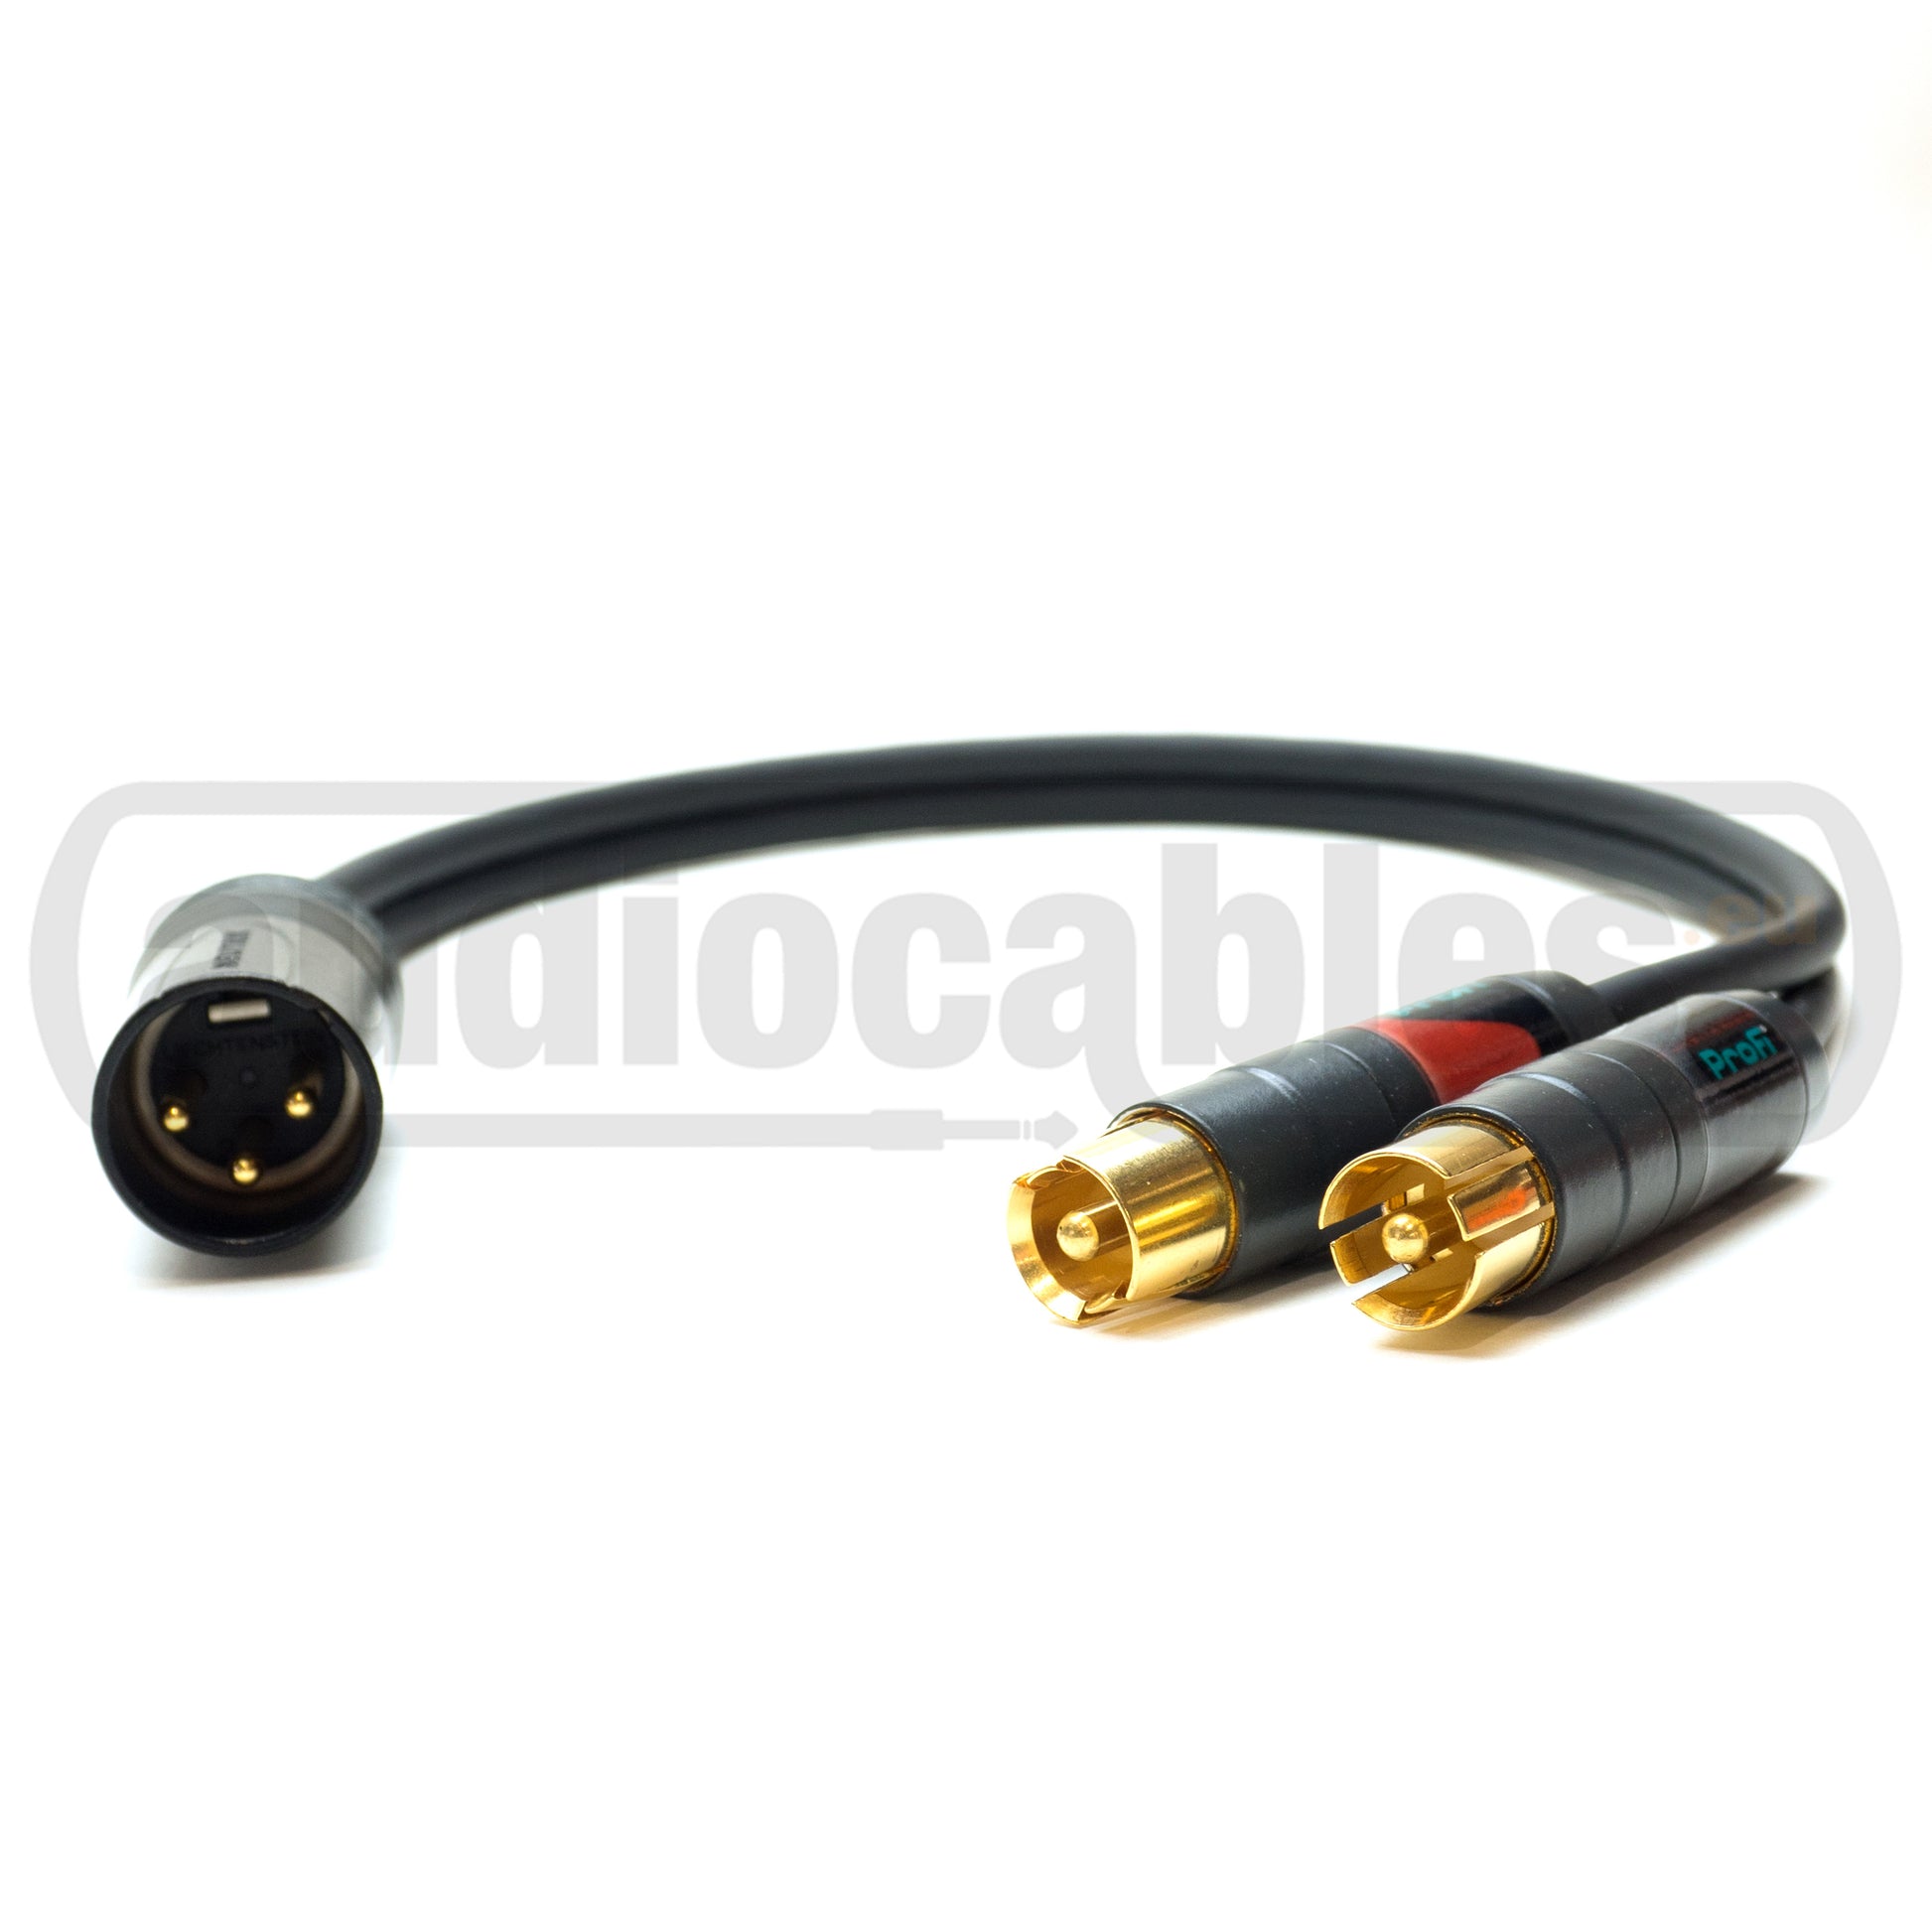 Mogami Gold XLRM to RCA Cable (3 Foot)